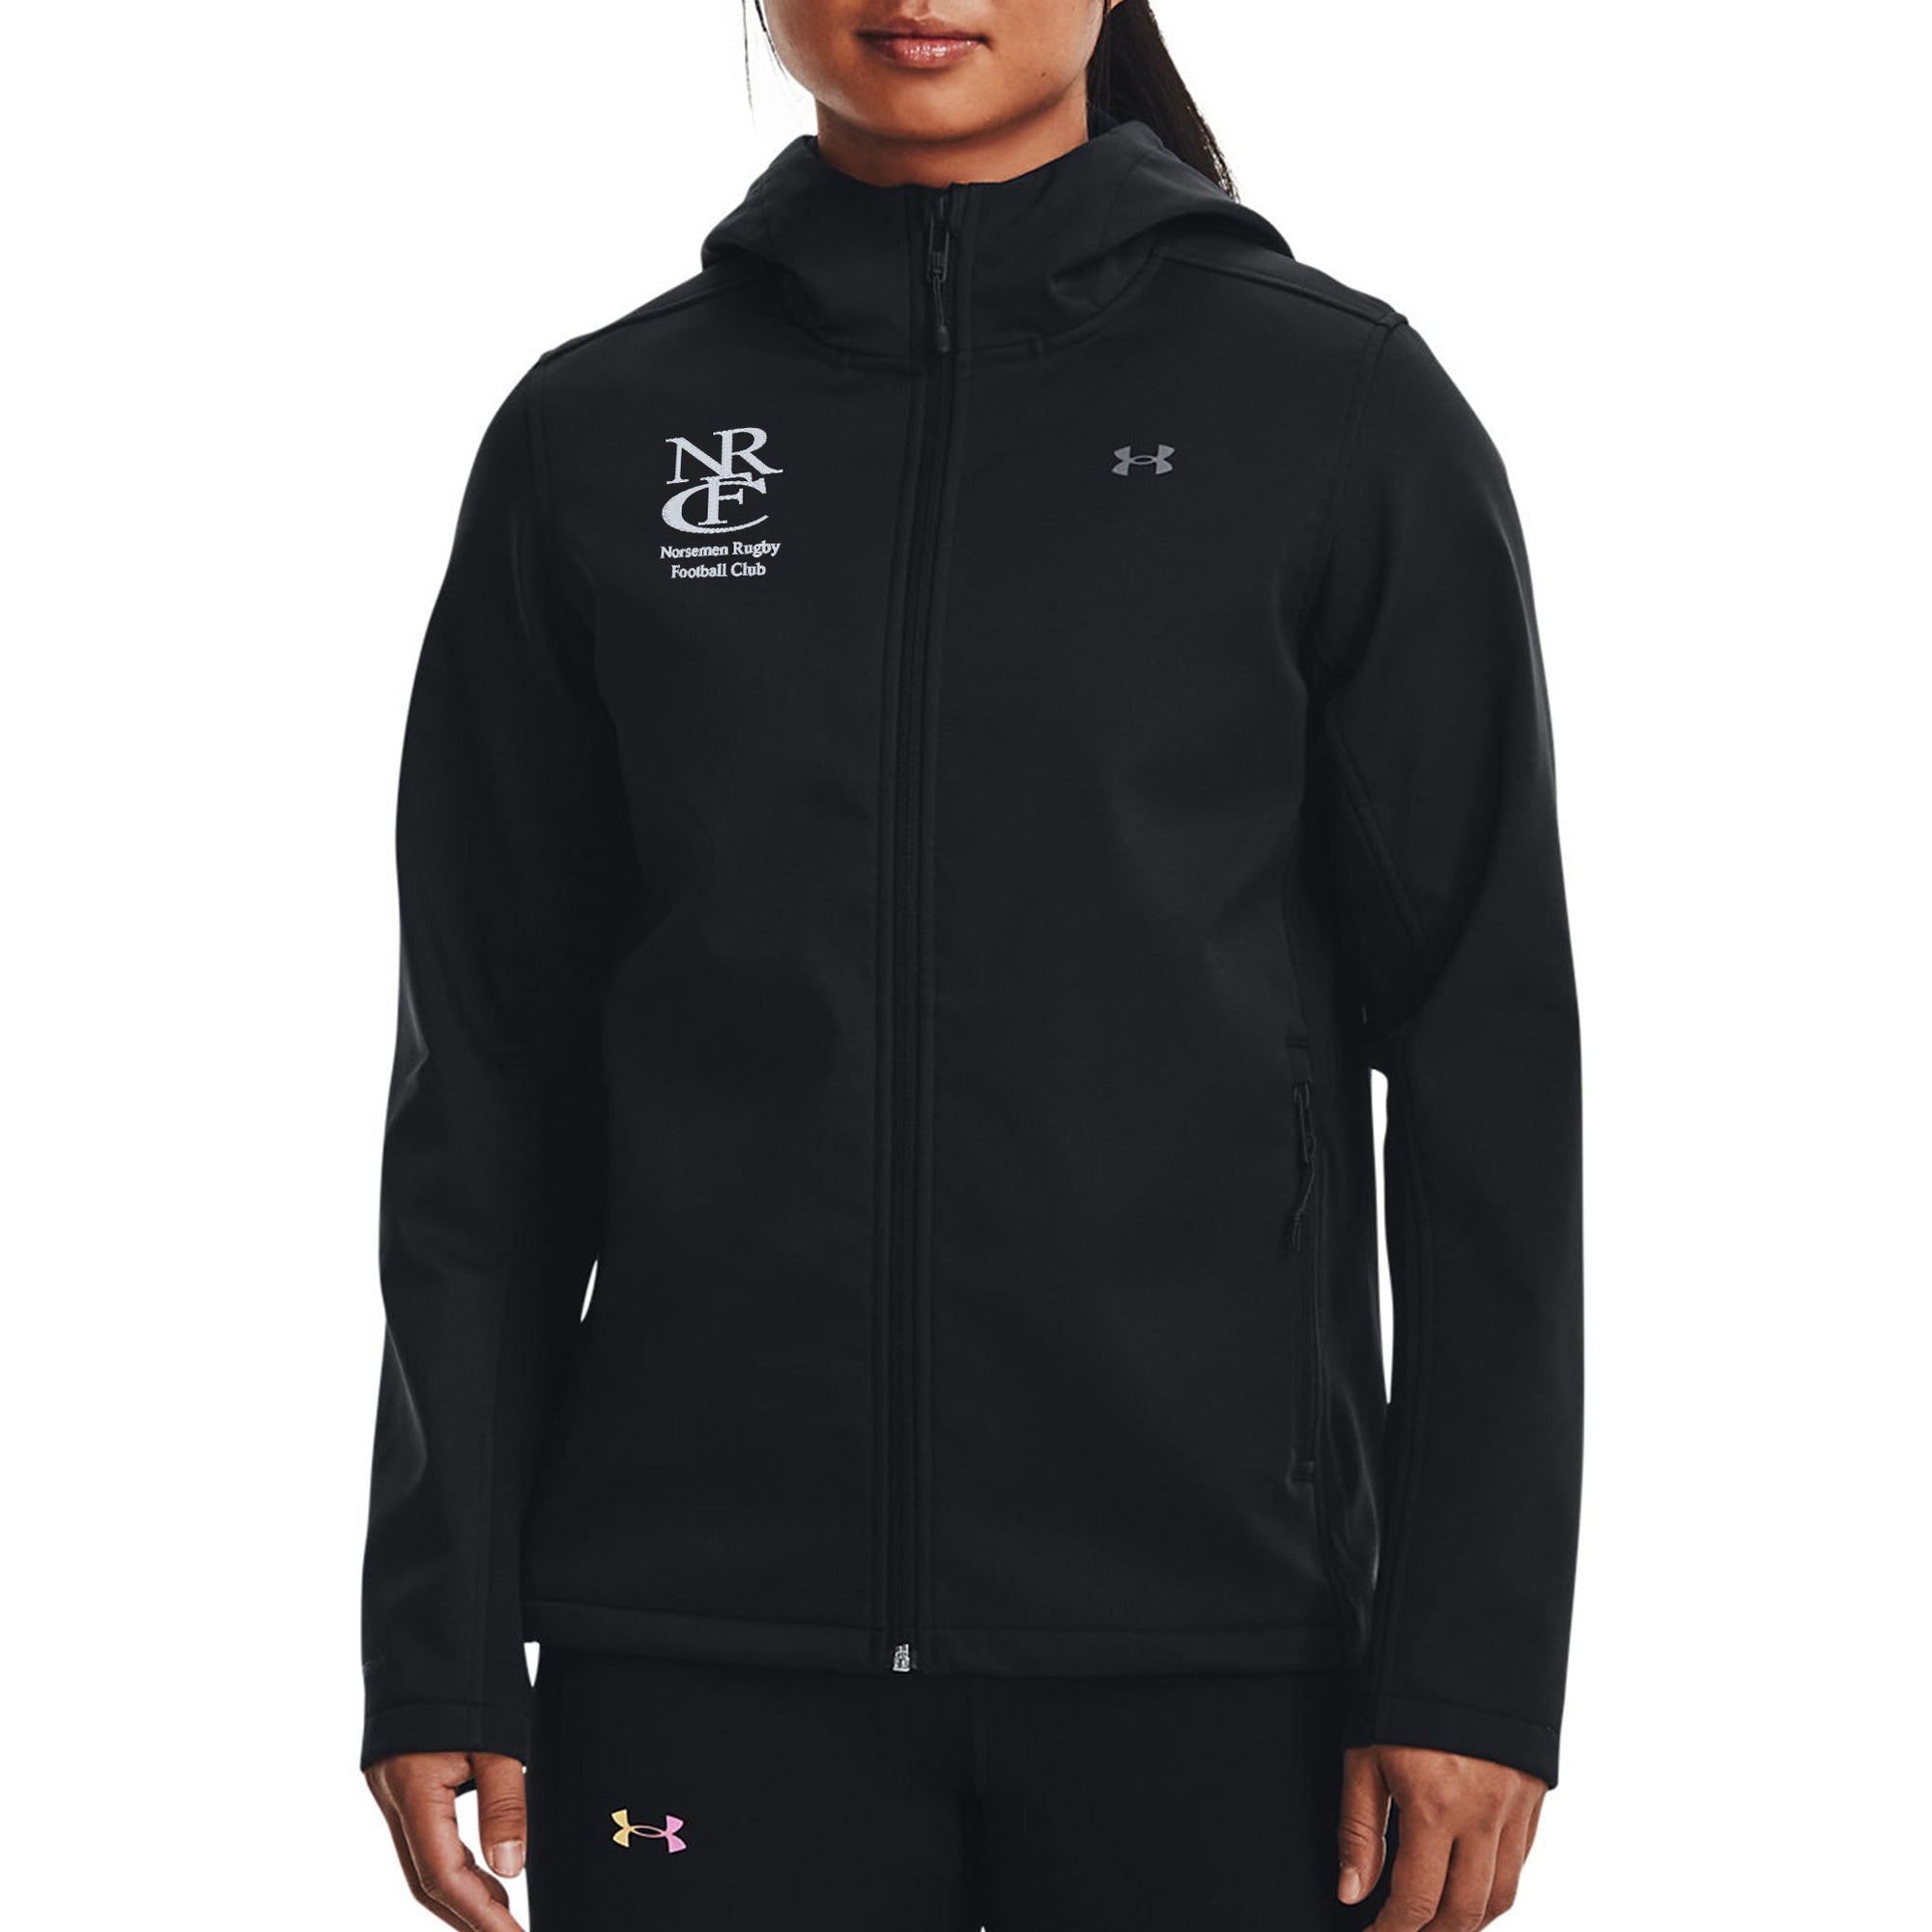 Rugby Imports Norsemen RFC Women's Coldgear Hooded Infrared Jacket